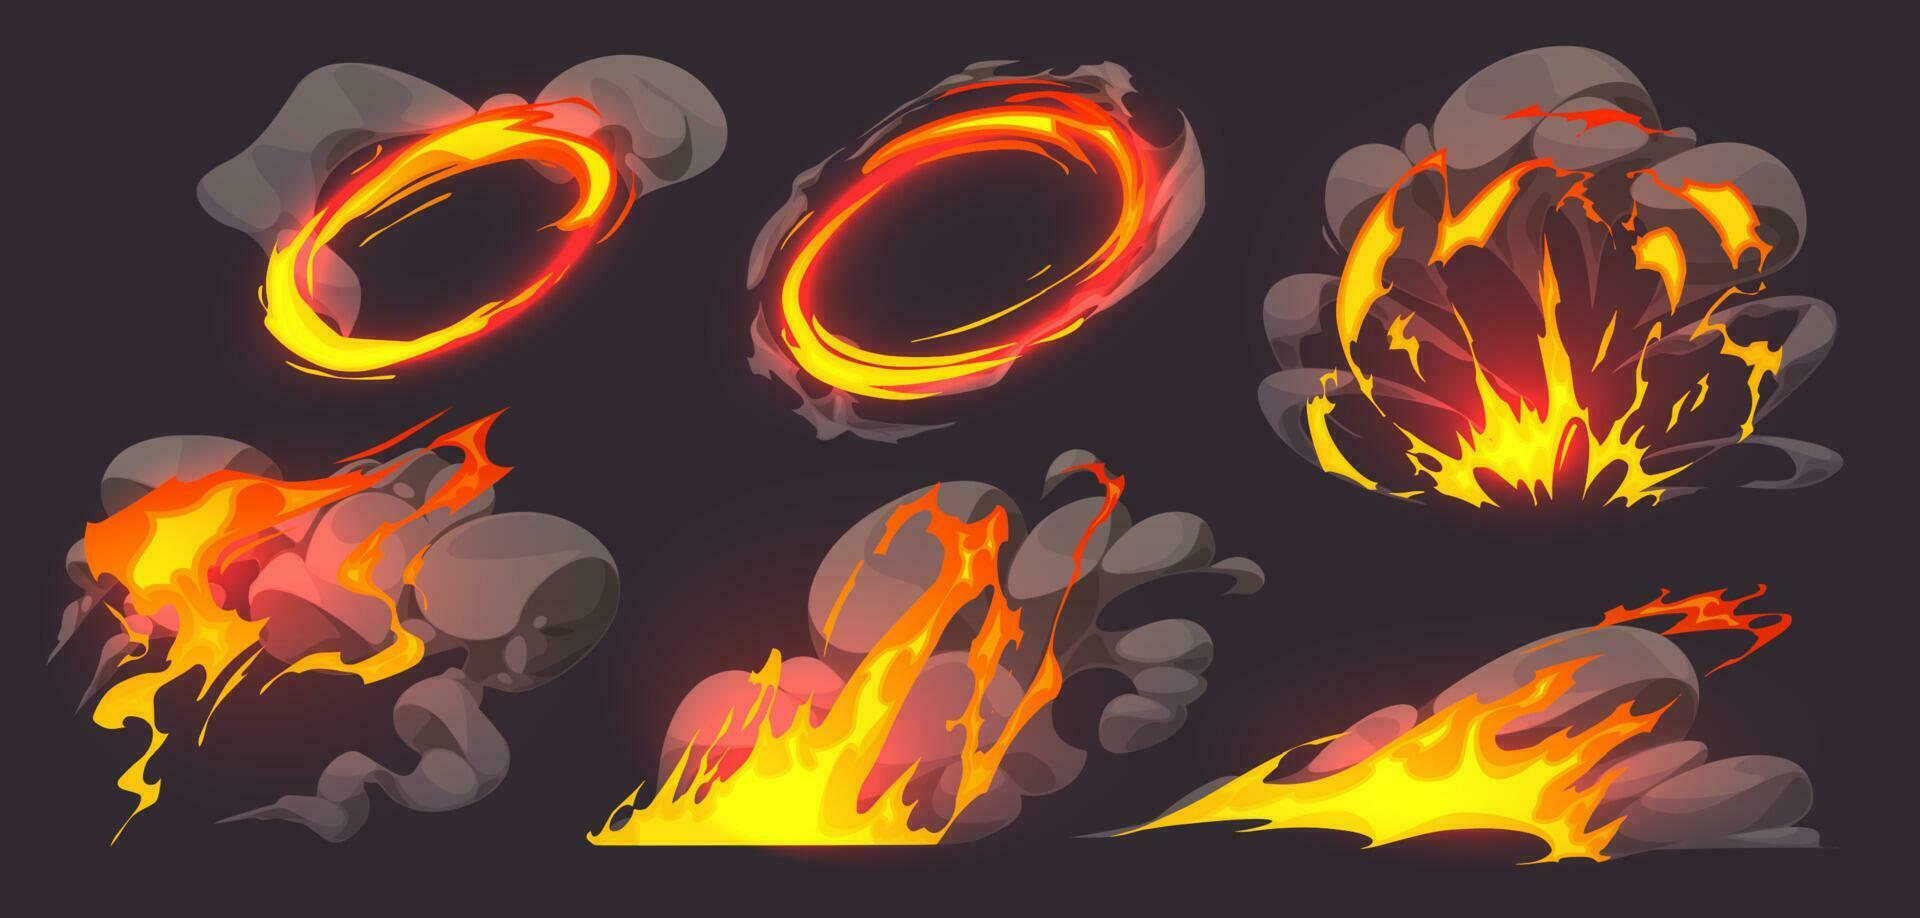 Game effect of fire, flame animation with smoke vector